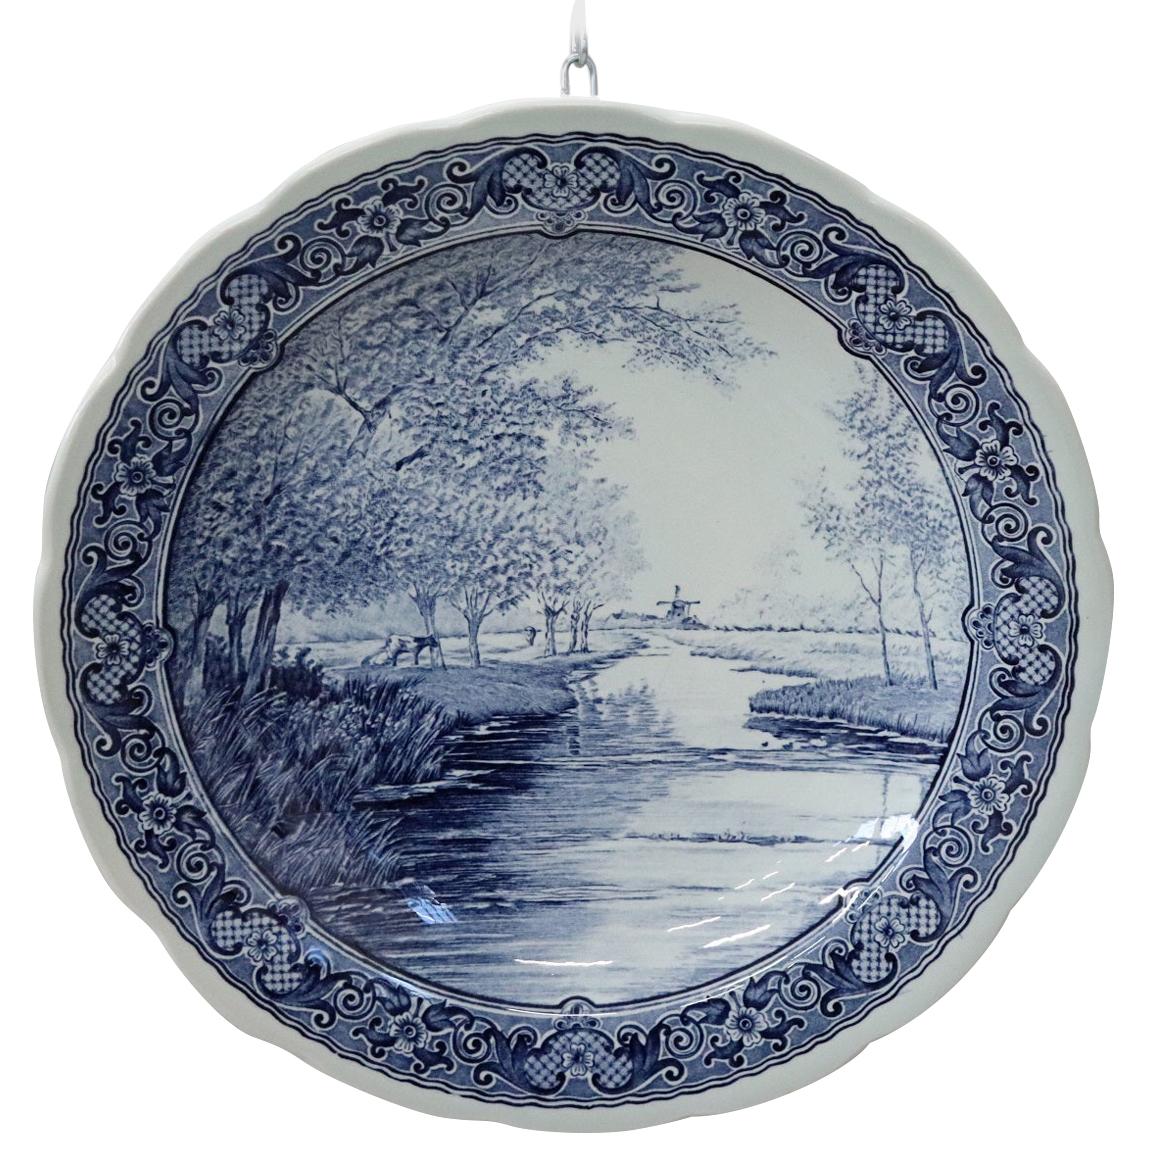 Vintage circa 1950s Large Royal Delft Boch Blue and White Wall Plate